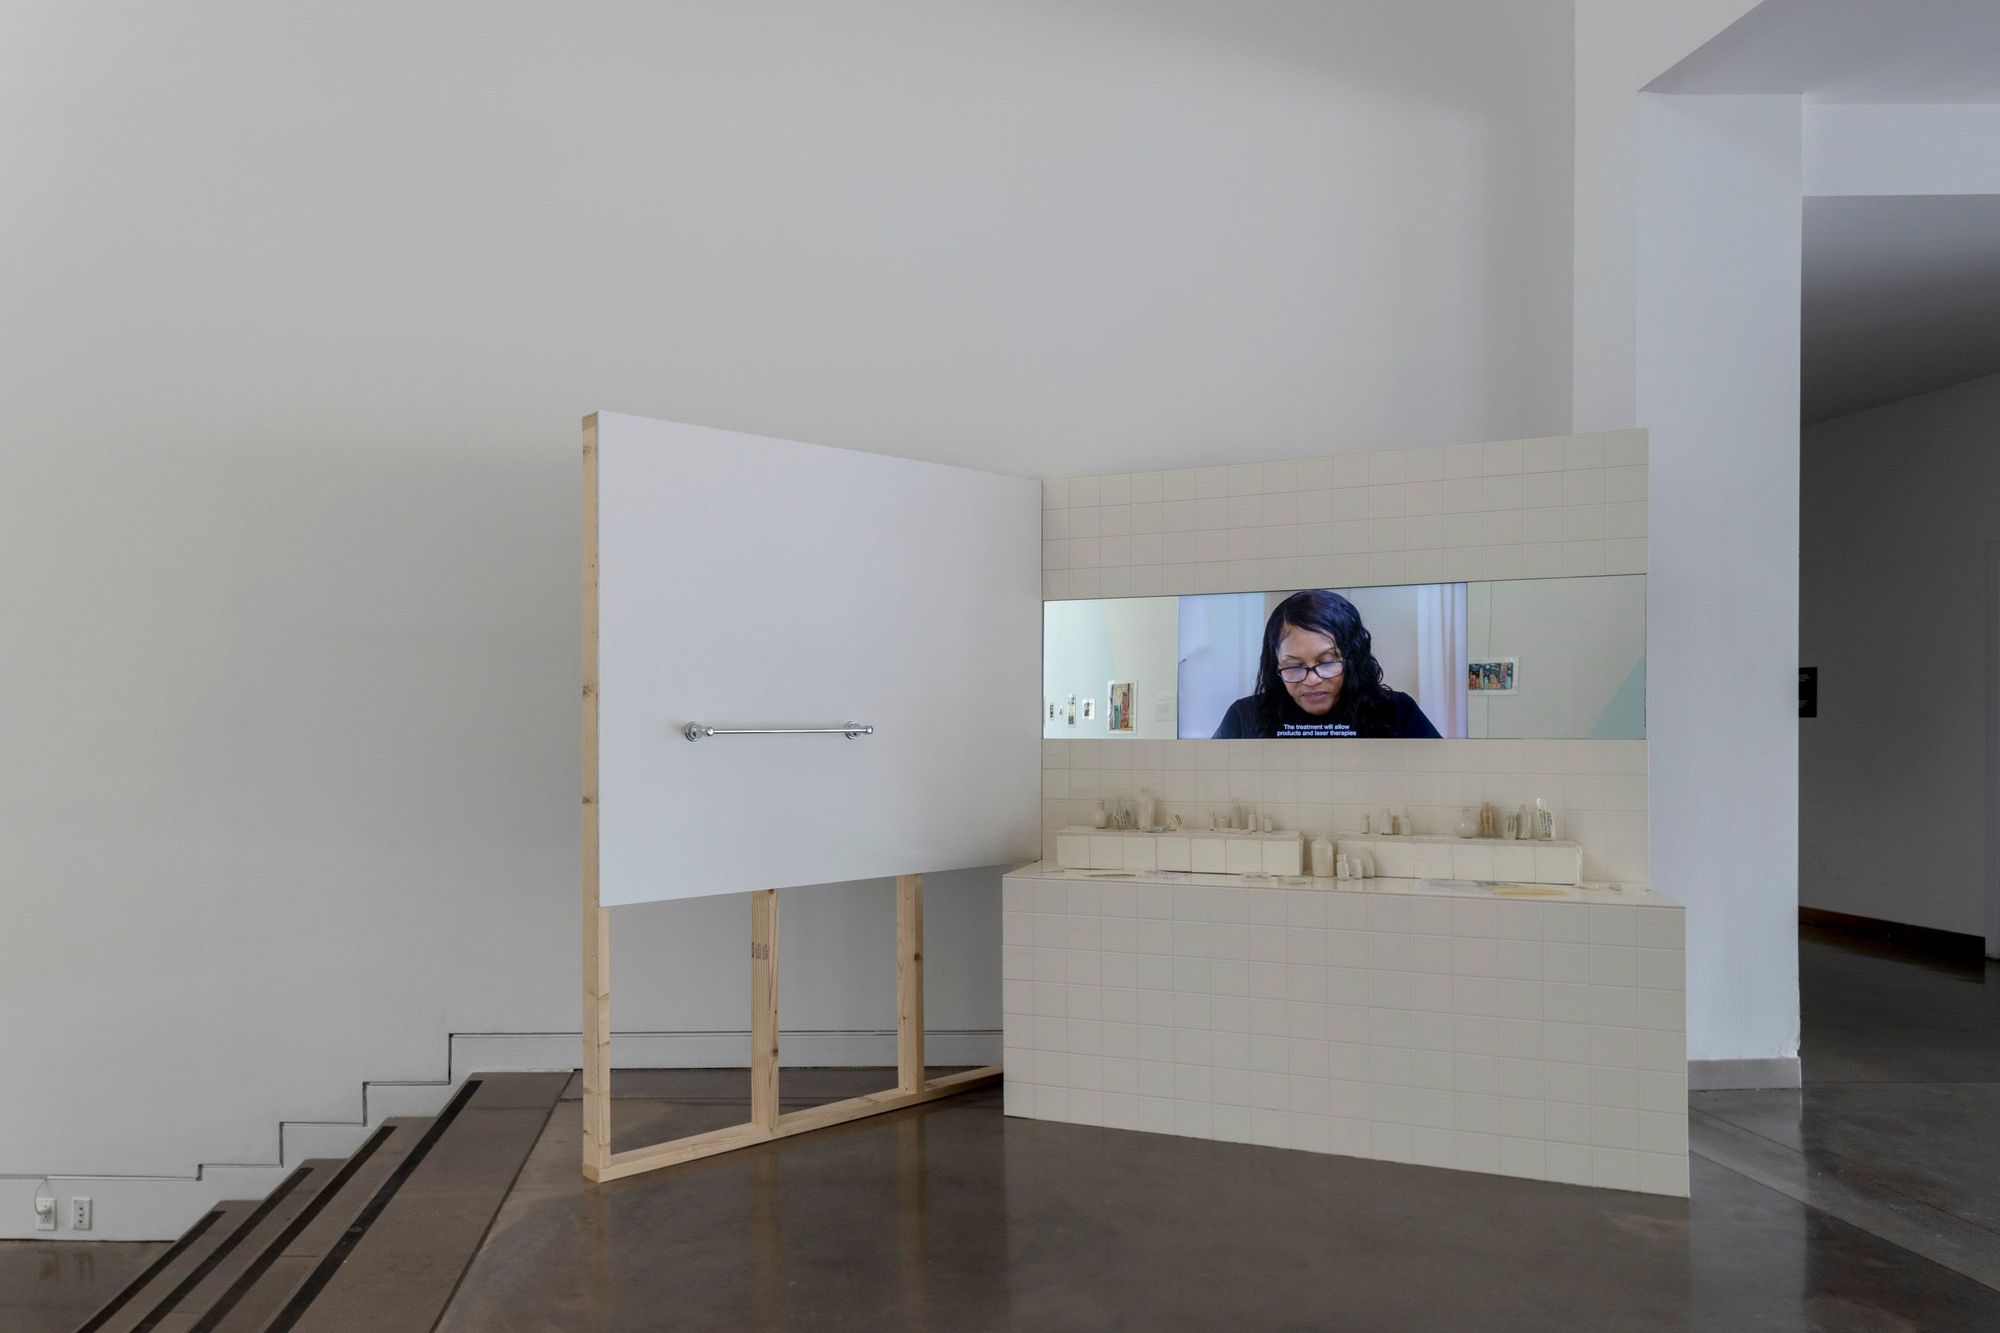 Installation shot of Ilana Harris-Babou, Fine Lines, 2020. Installation with wood, sheetrock, tile, grout, glass, mirror, inkjet print, resin, ceramic sculpture, flatscreen monitor and single-channel HD video, sound, 11 minutes, overall dimensions 84 × 137 × 56 inches. Included in "After the Plaster Foundation, or, "Where can we live?,"" Queens Museum, September 16, 2020 - January 17, 2021. Courtesy of Queens Museum. Image: Hal Zhang.